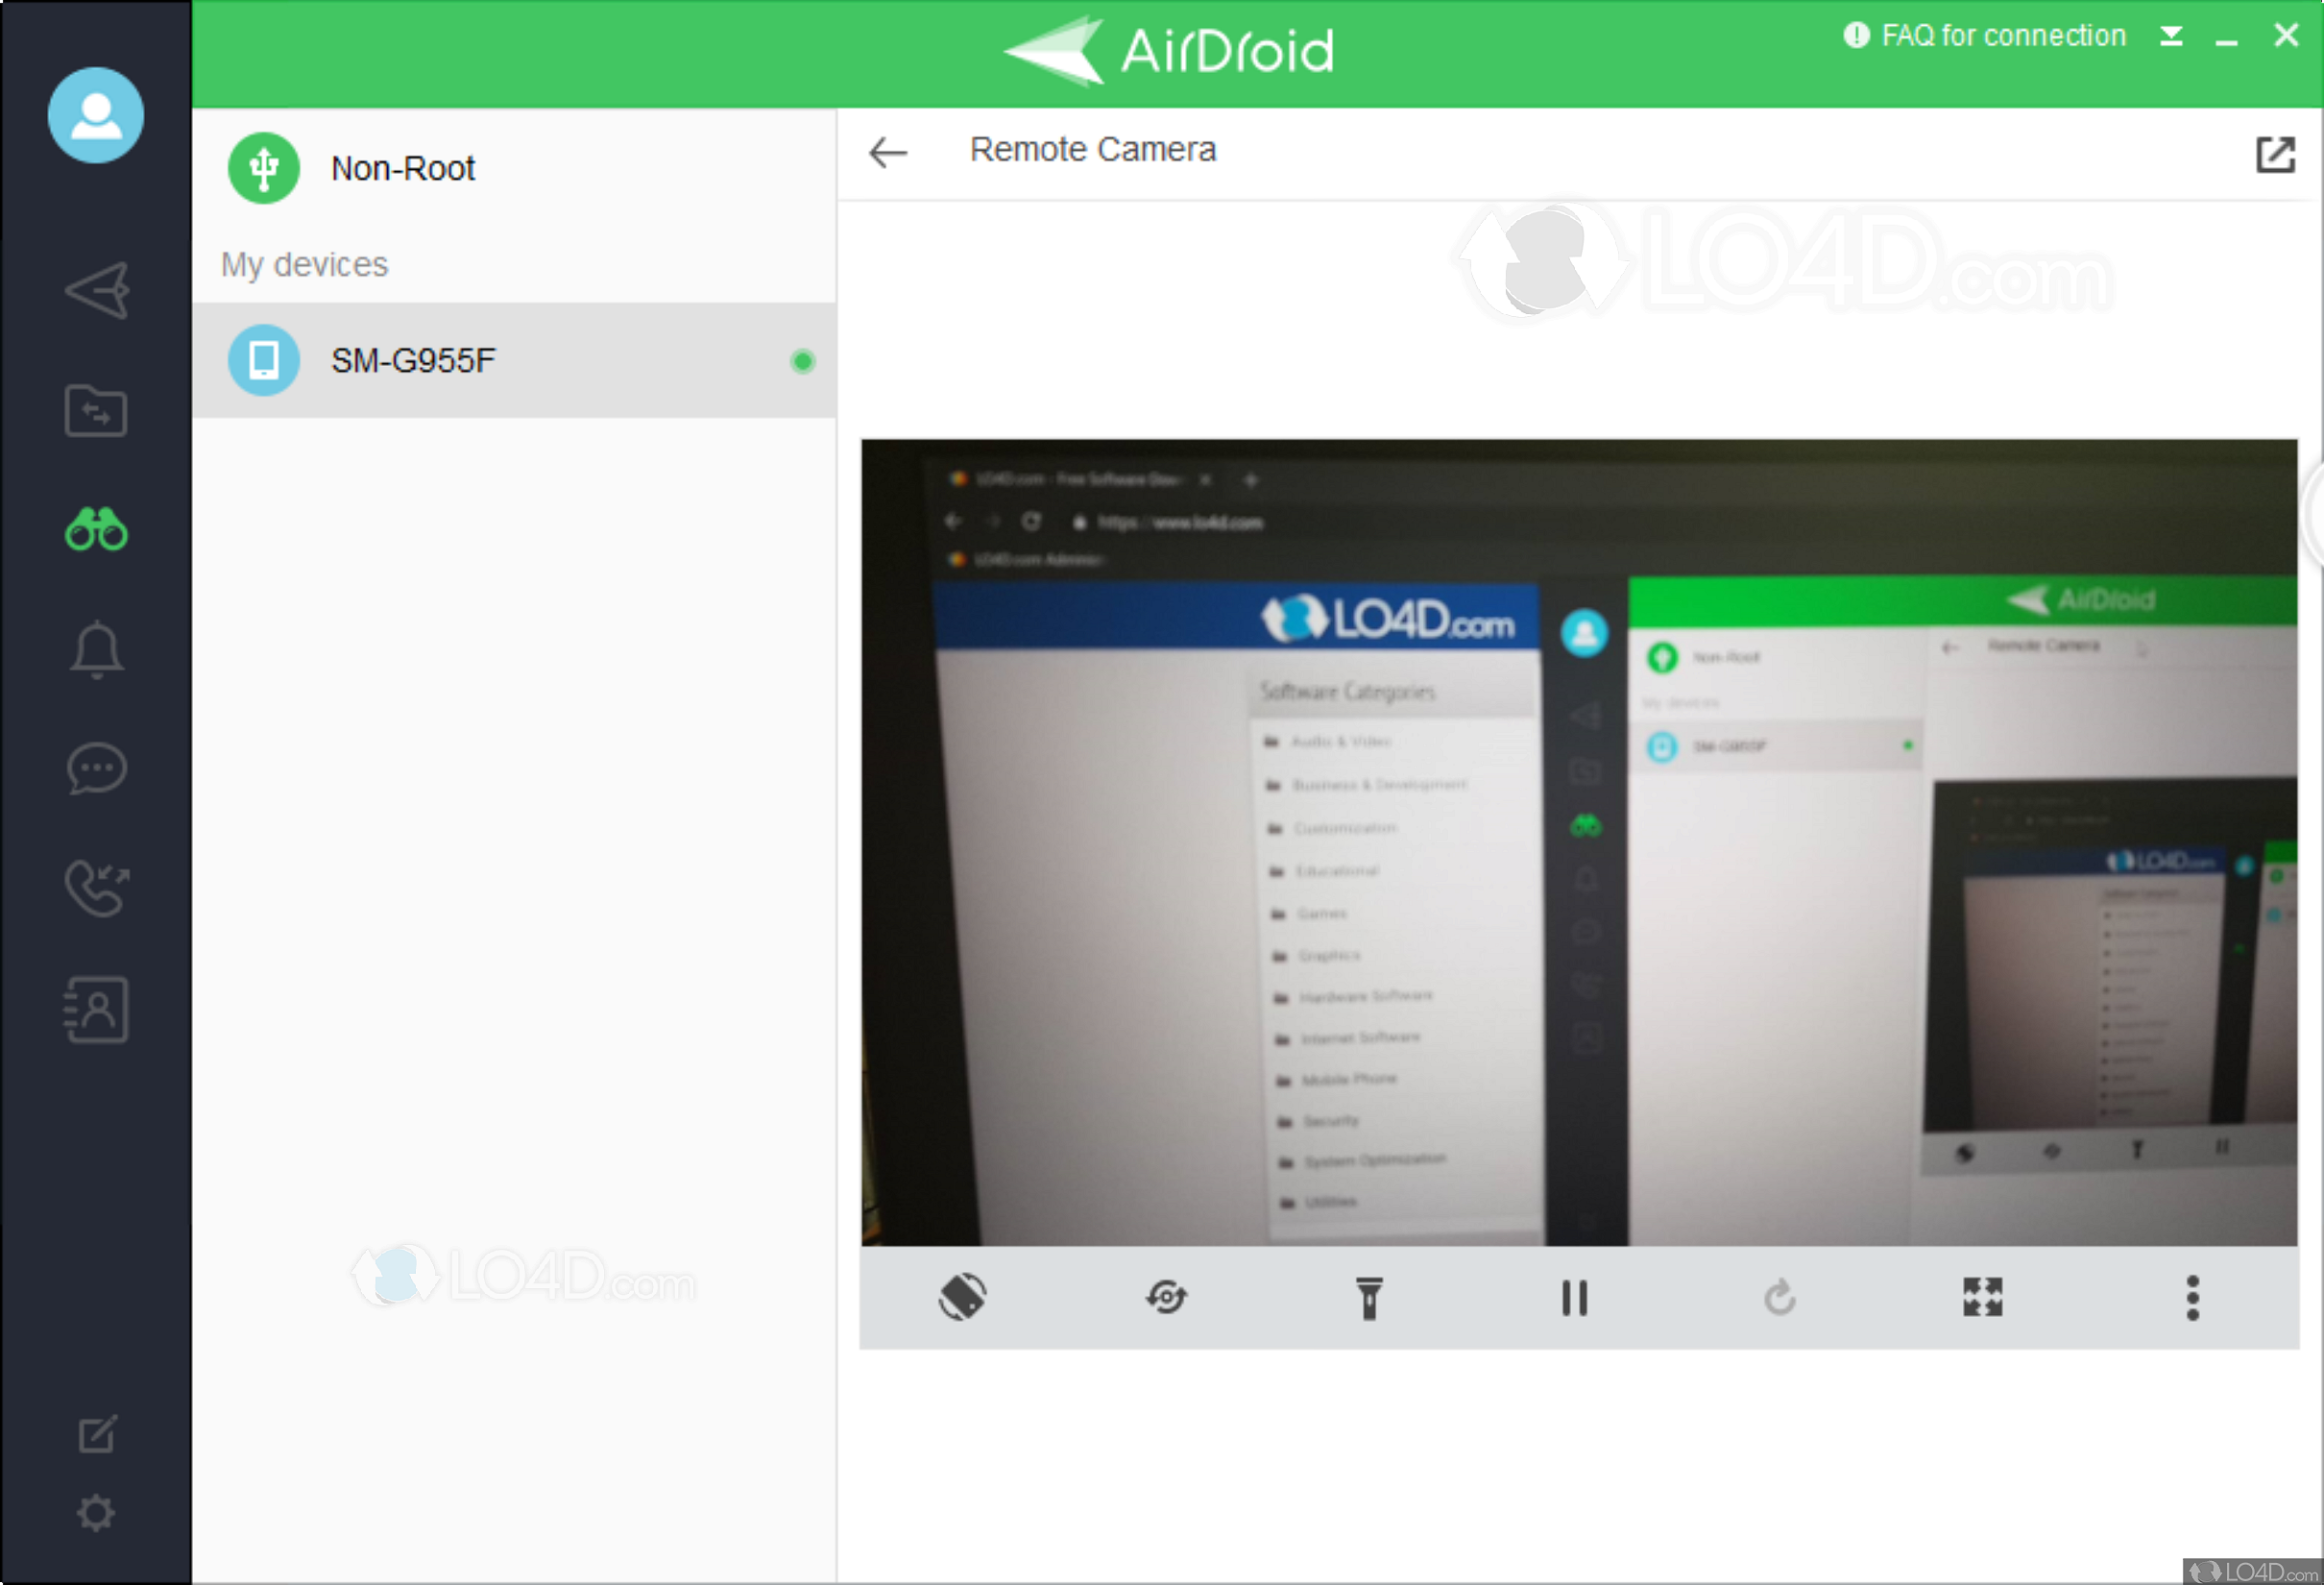 download photos from phone using airdroid desktop